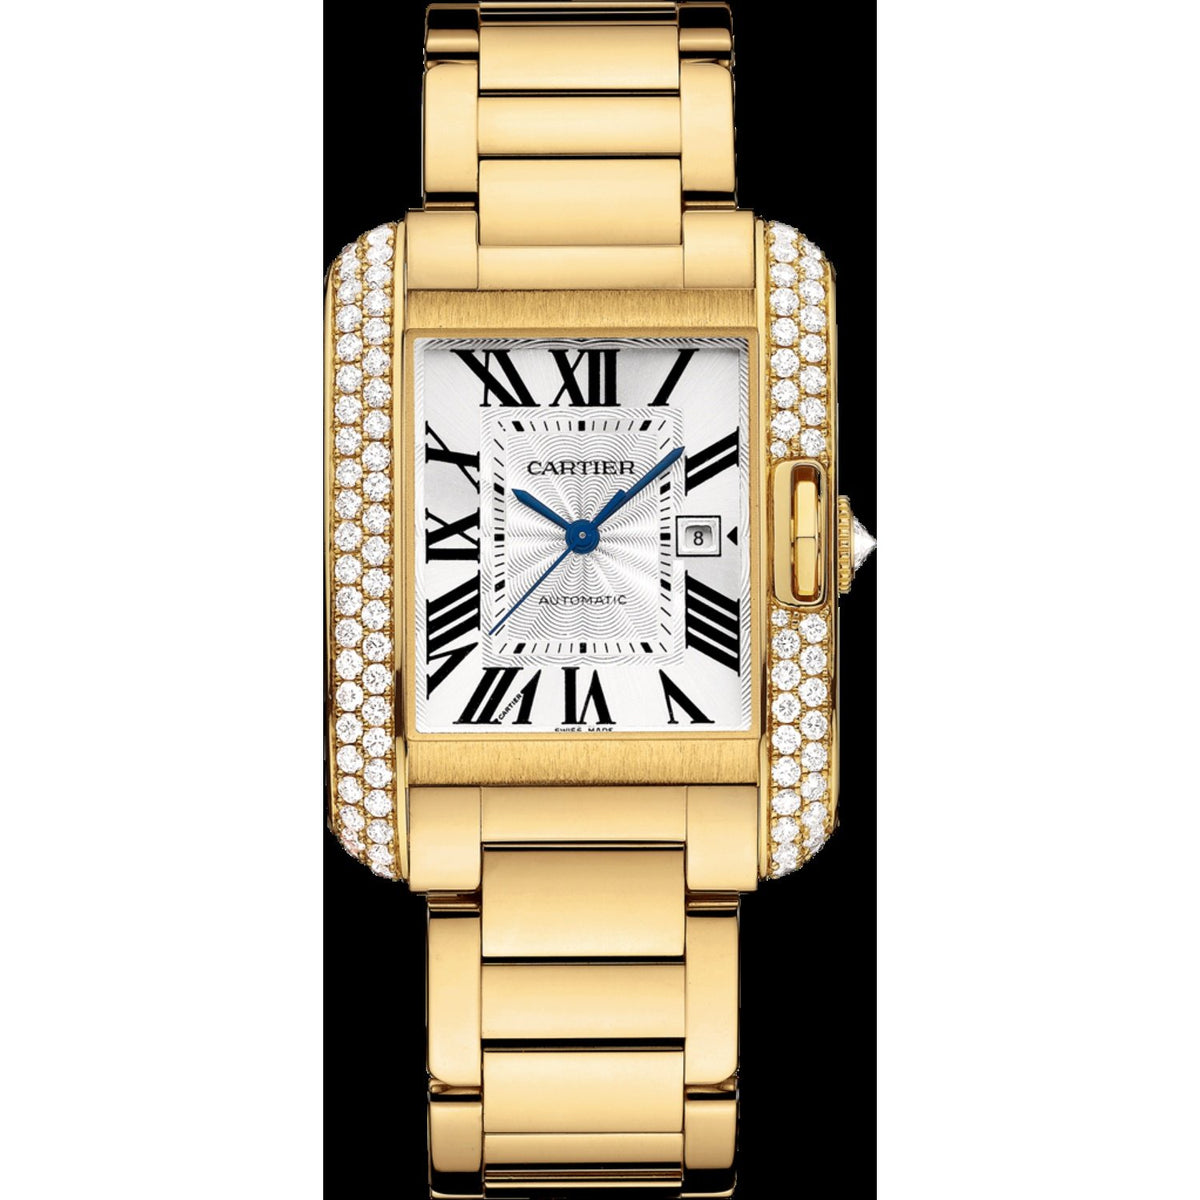 Cartier Unisex WT100006 Tank Gold-Tone Stainless Steel Watch